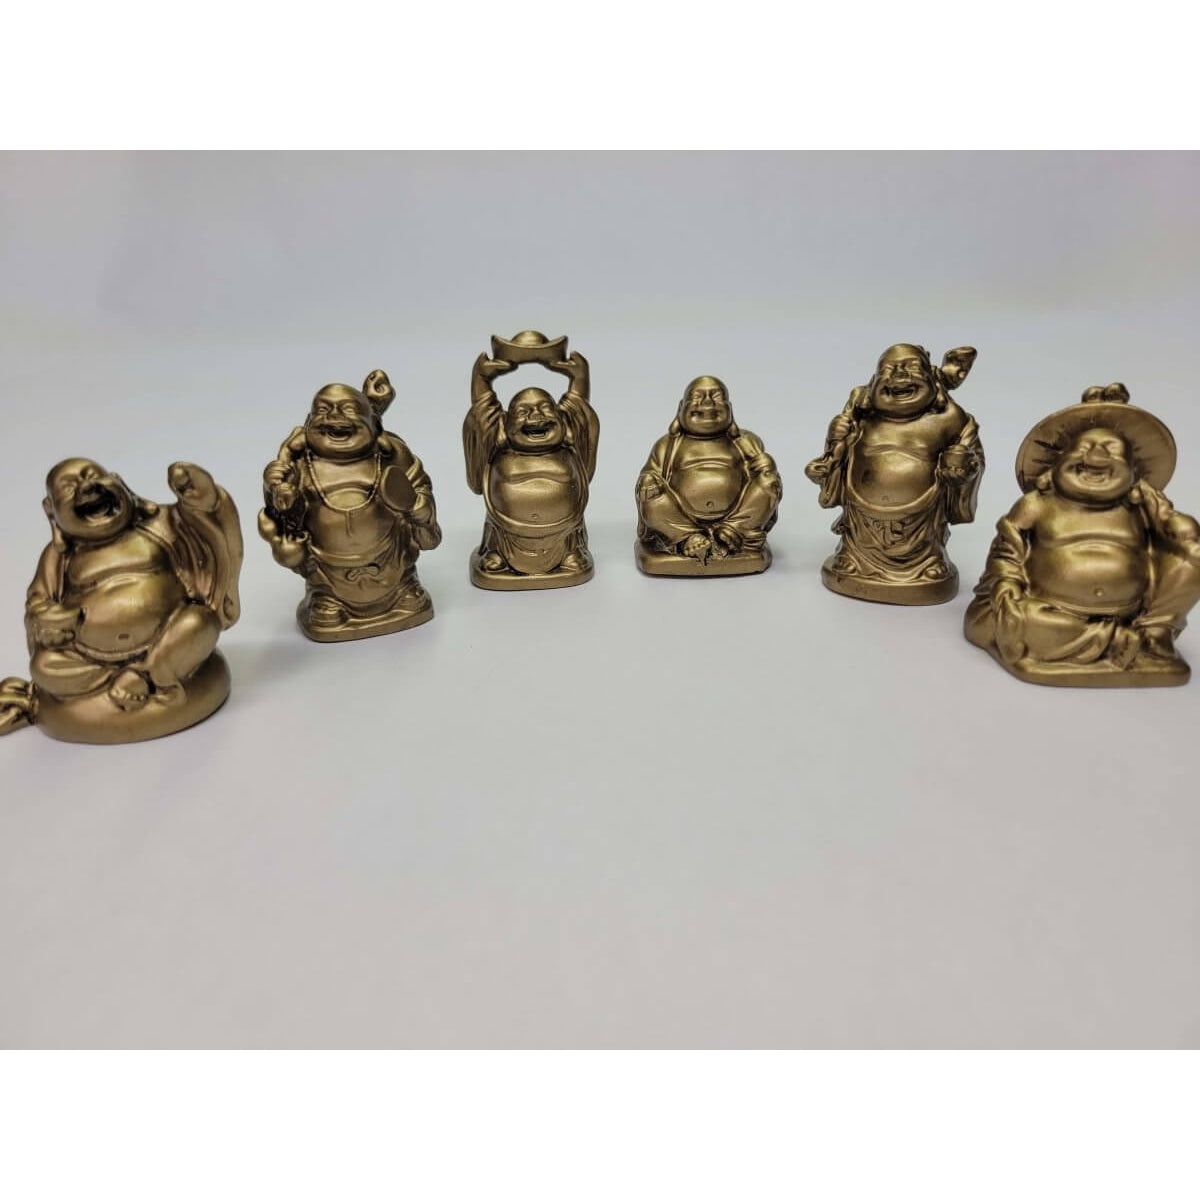 The Bombay Store Whitewood Handcarved Laughing Buddha